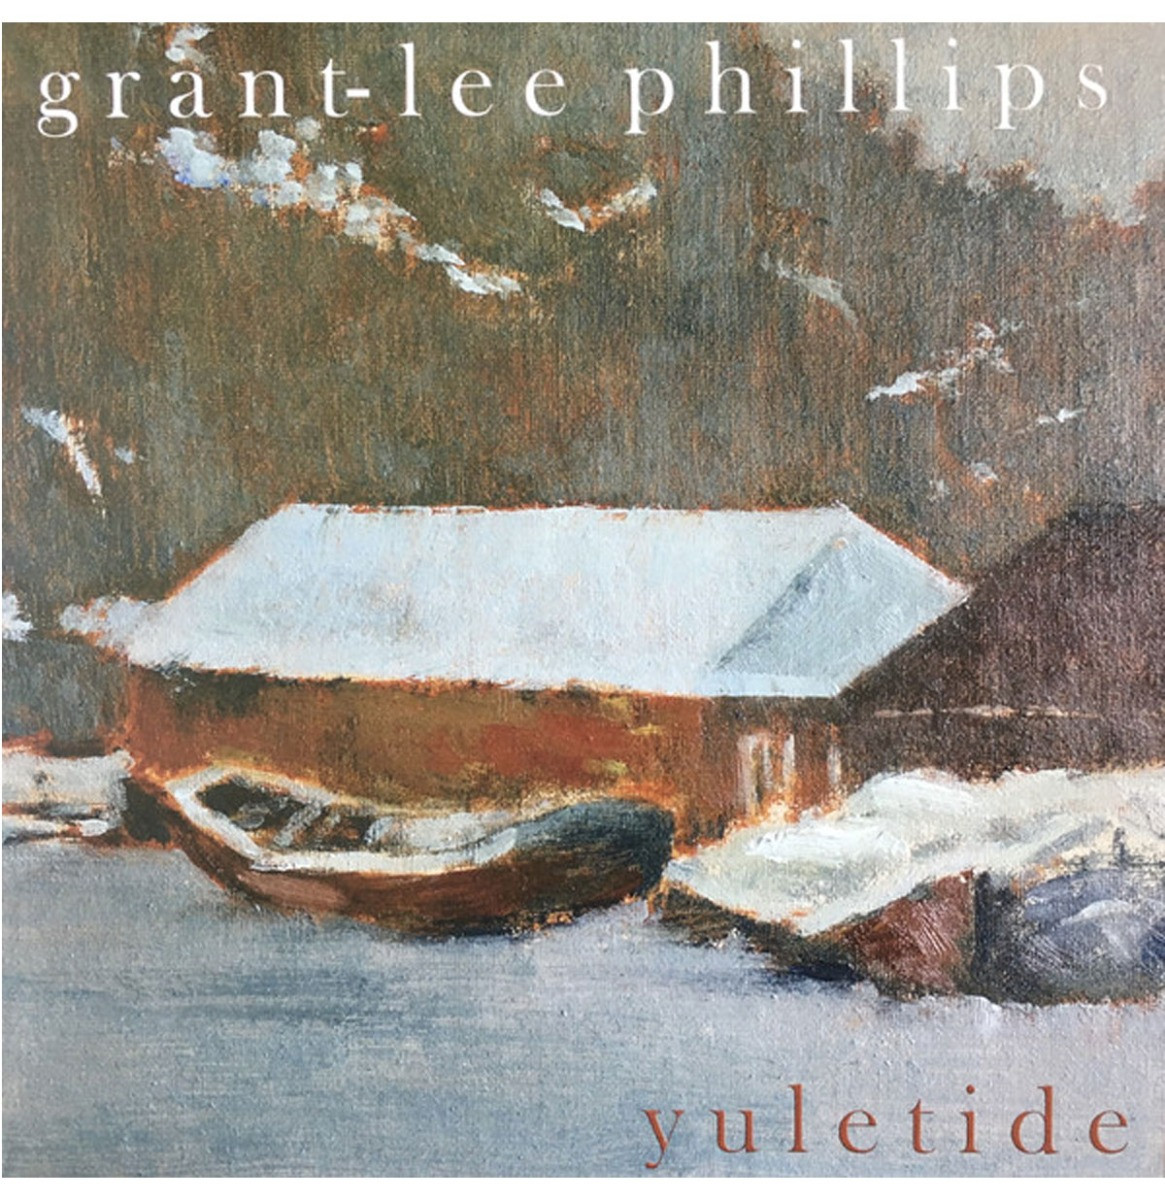 Grant-Lee Phillips - Yuletide (Record Store Day Black Friday 2021) LP